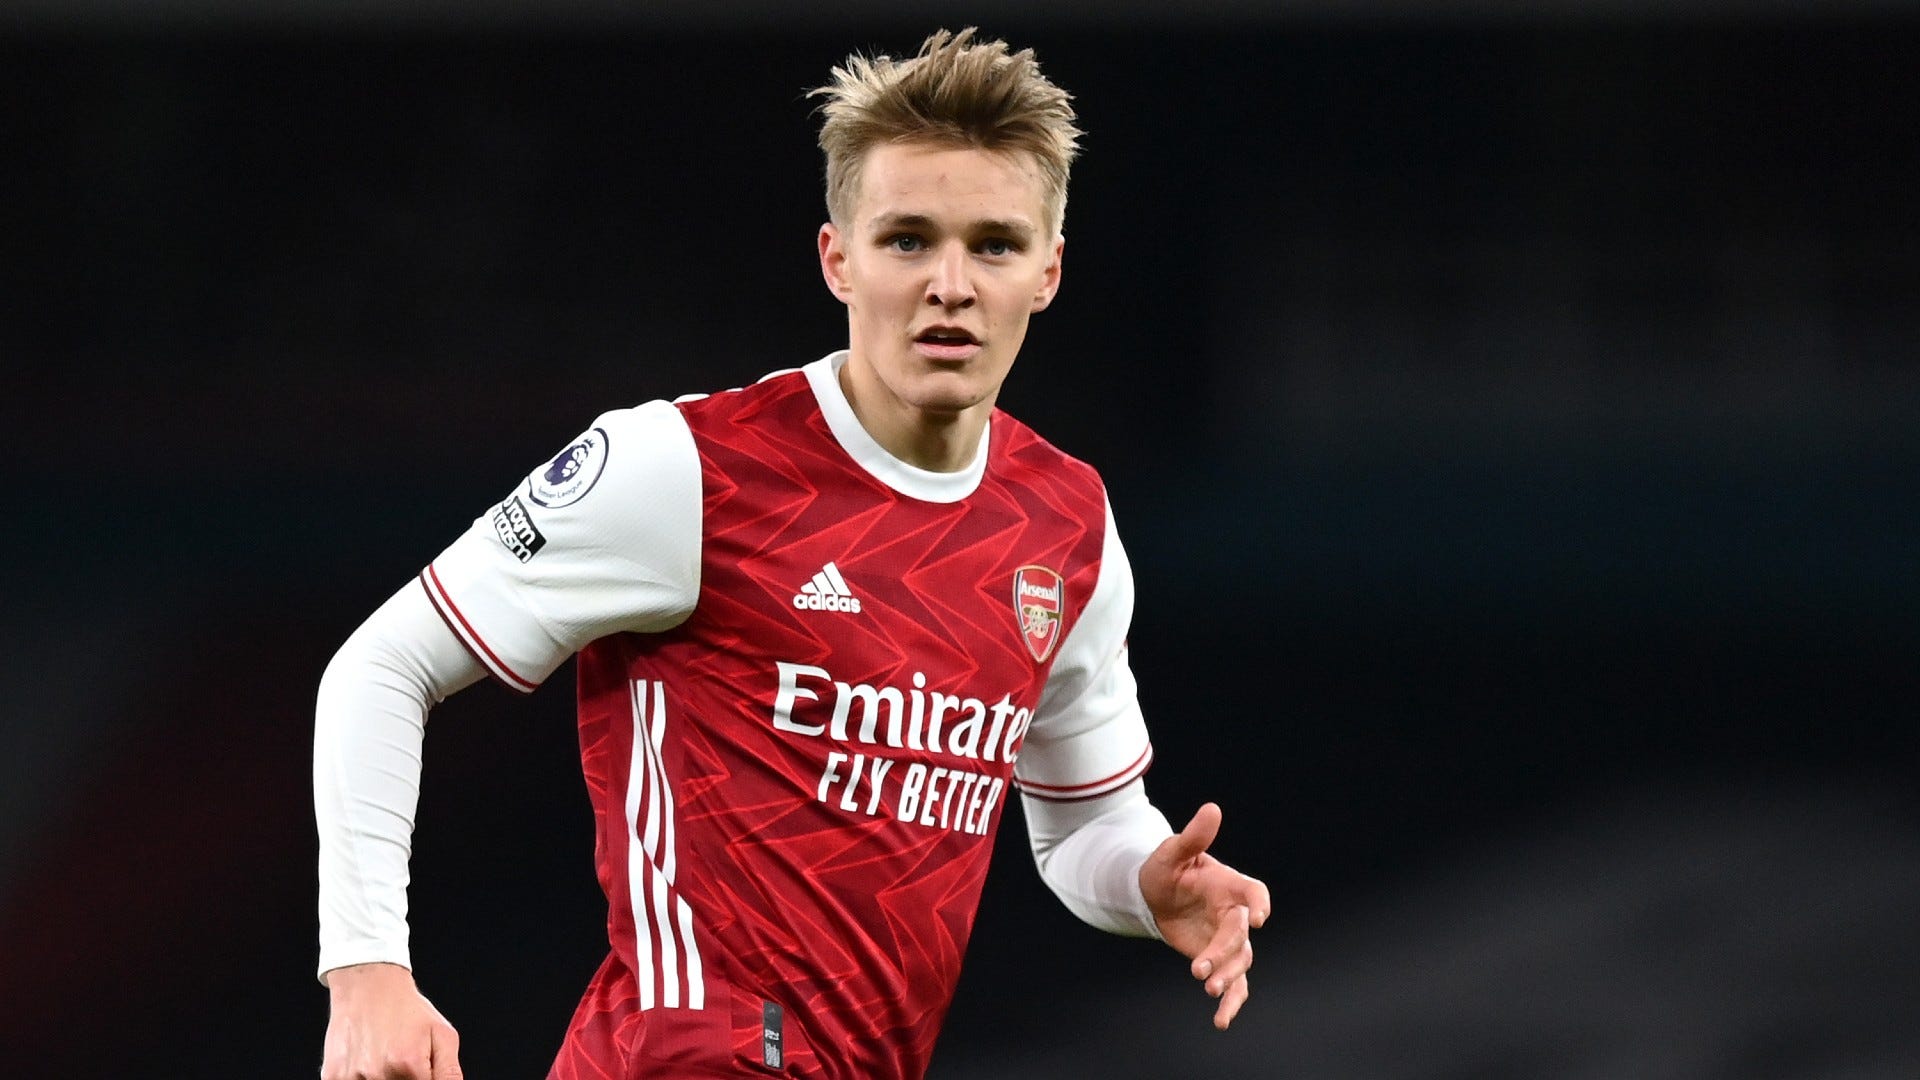  Martin Odegaard, a Norwegian professional footballer who plays as a midfielder for Premier League club Arsenal and the Norway national team, is playing soccer.